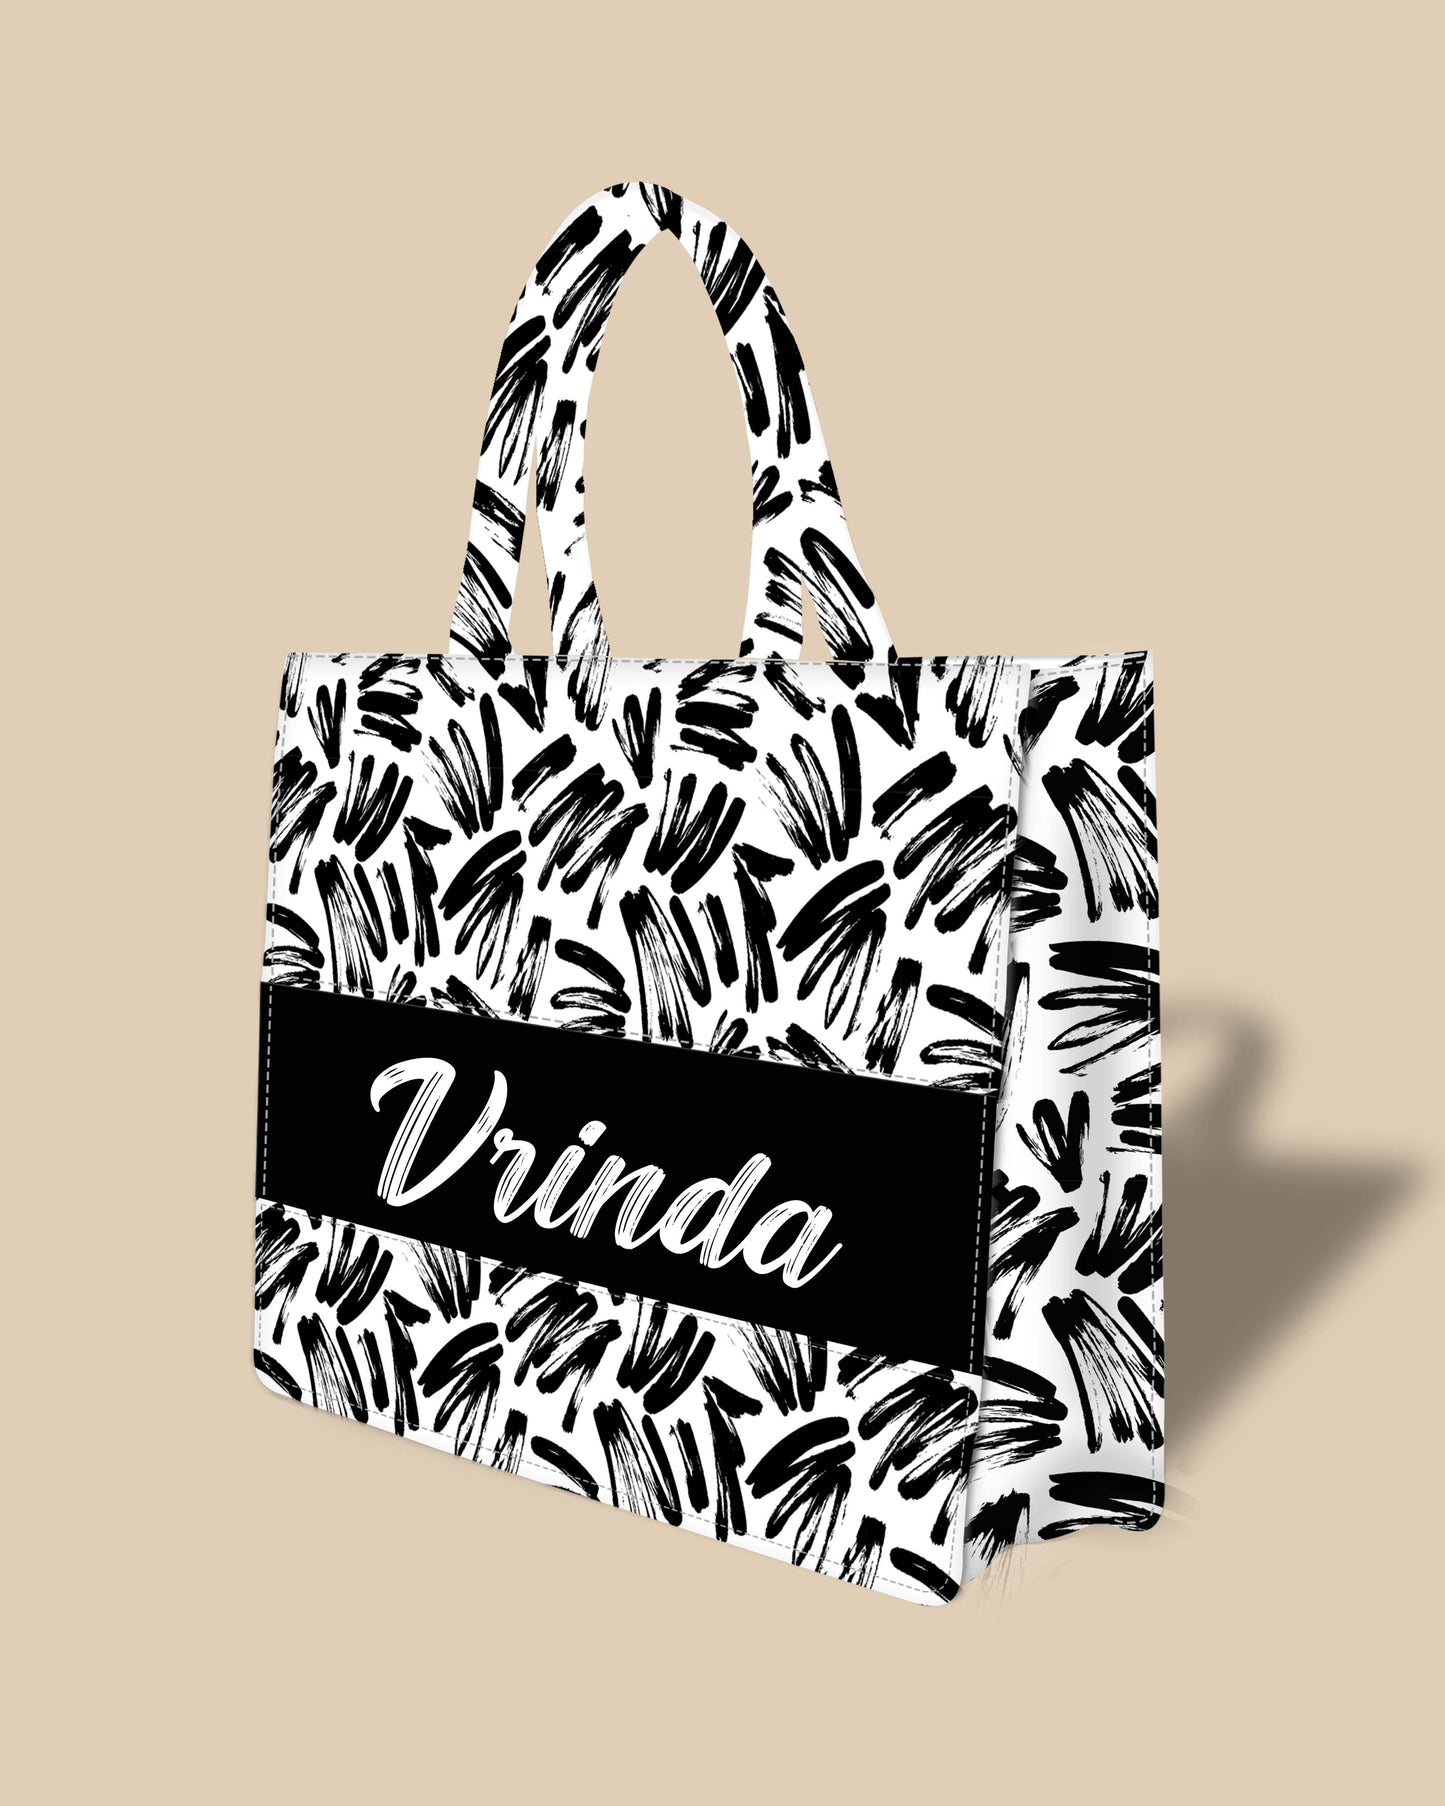 Personalized Tote Bag Designed With Black Brushstrokes Pattern